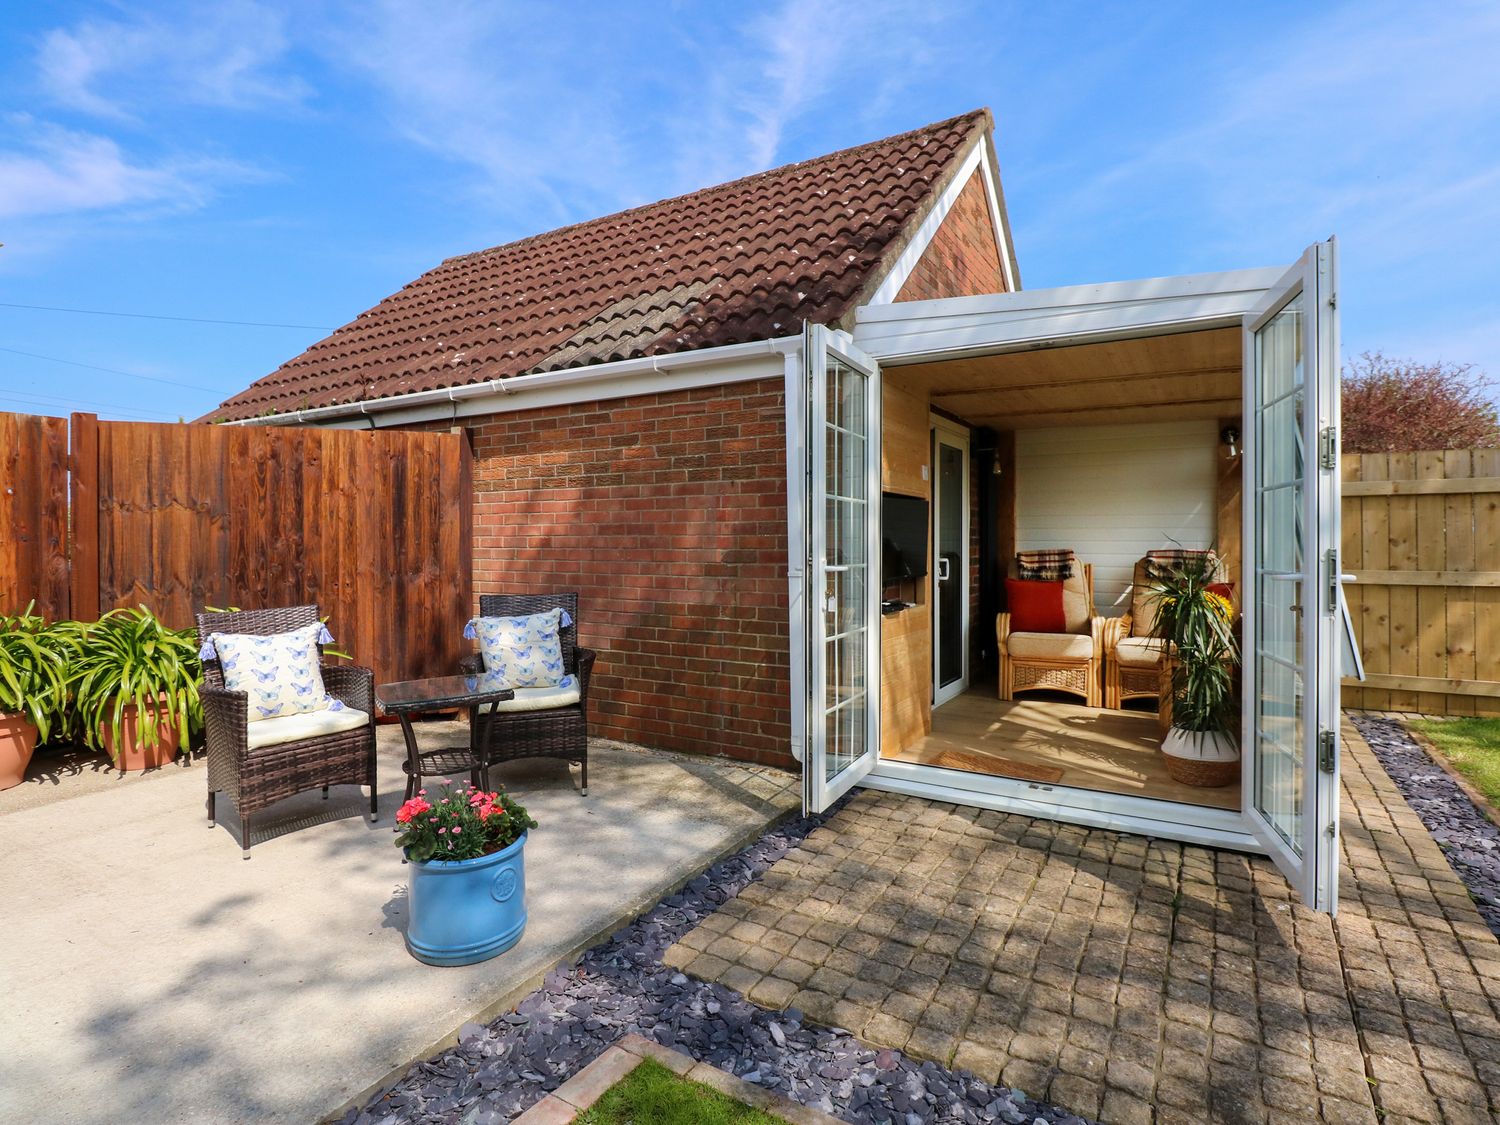 Meadow Cottage - Lincolnshire - 1144326 - photo 1